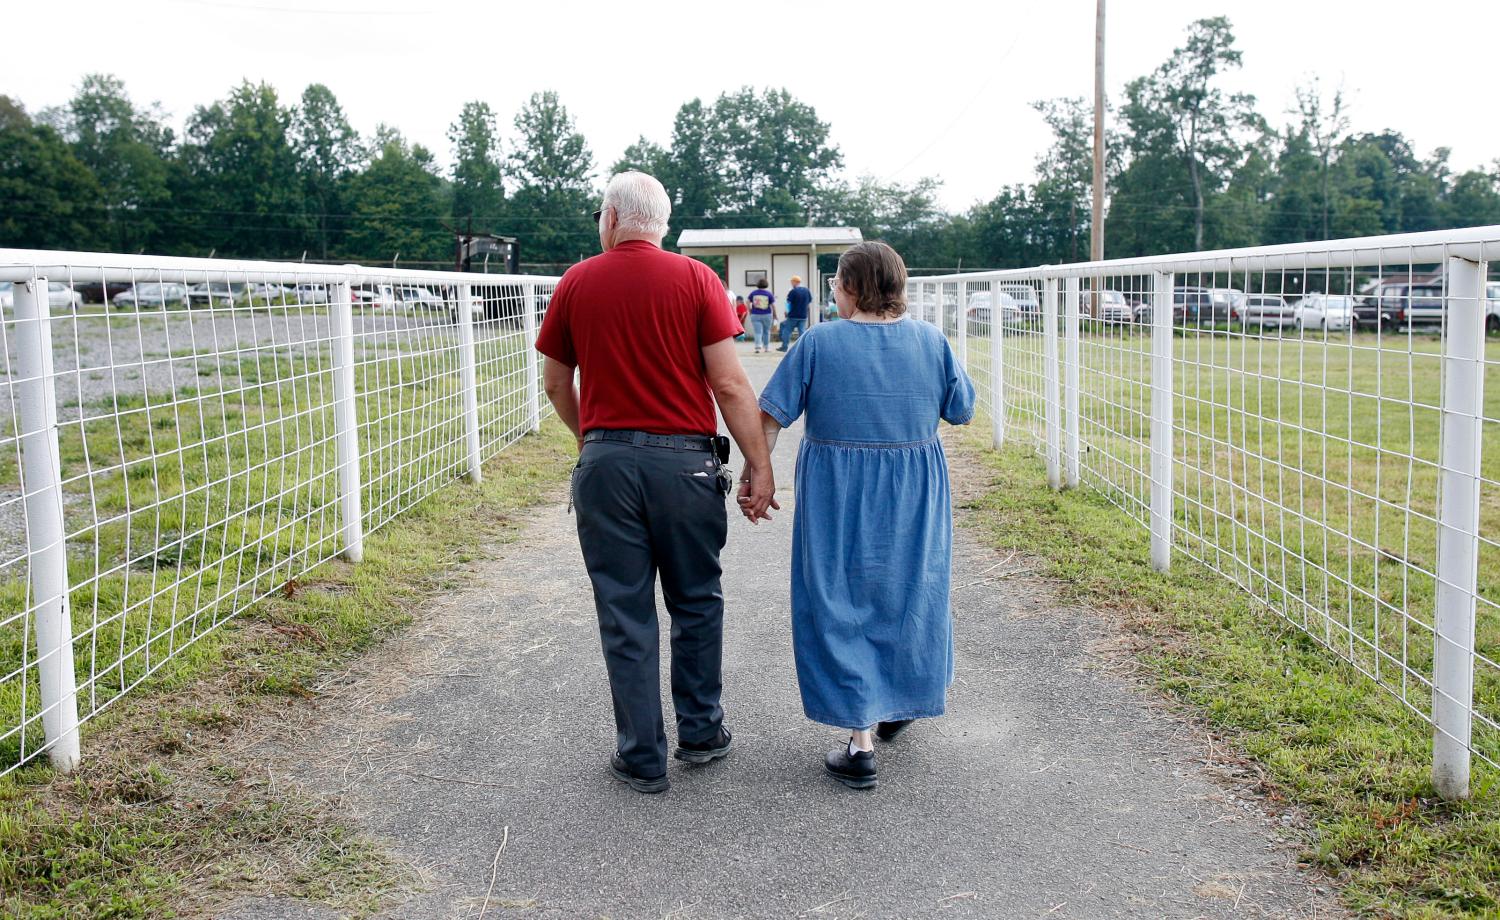 A couple leaves the Remote Area Medical (RAM) health clinic at the Wise County Fairgrounds in Wise, Virginia July 24, 2009. The free clinic, which lasts 2 1/2 days, is the largest of its kind in the nation providing medical, dental and vision services from more than 1,400 medical volunteers. For many residents of this Appalachian area, the RAM clinic serves as the only medical care they may receive each year. REUTERS/Shannon Stapleton